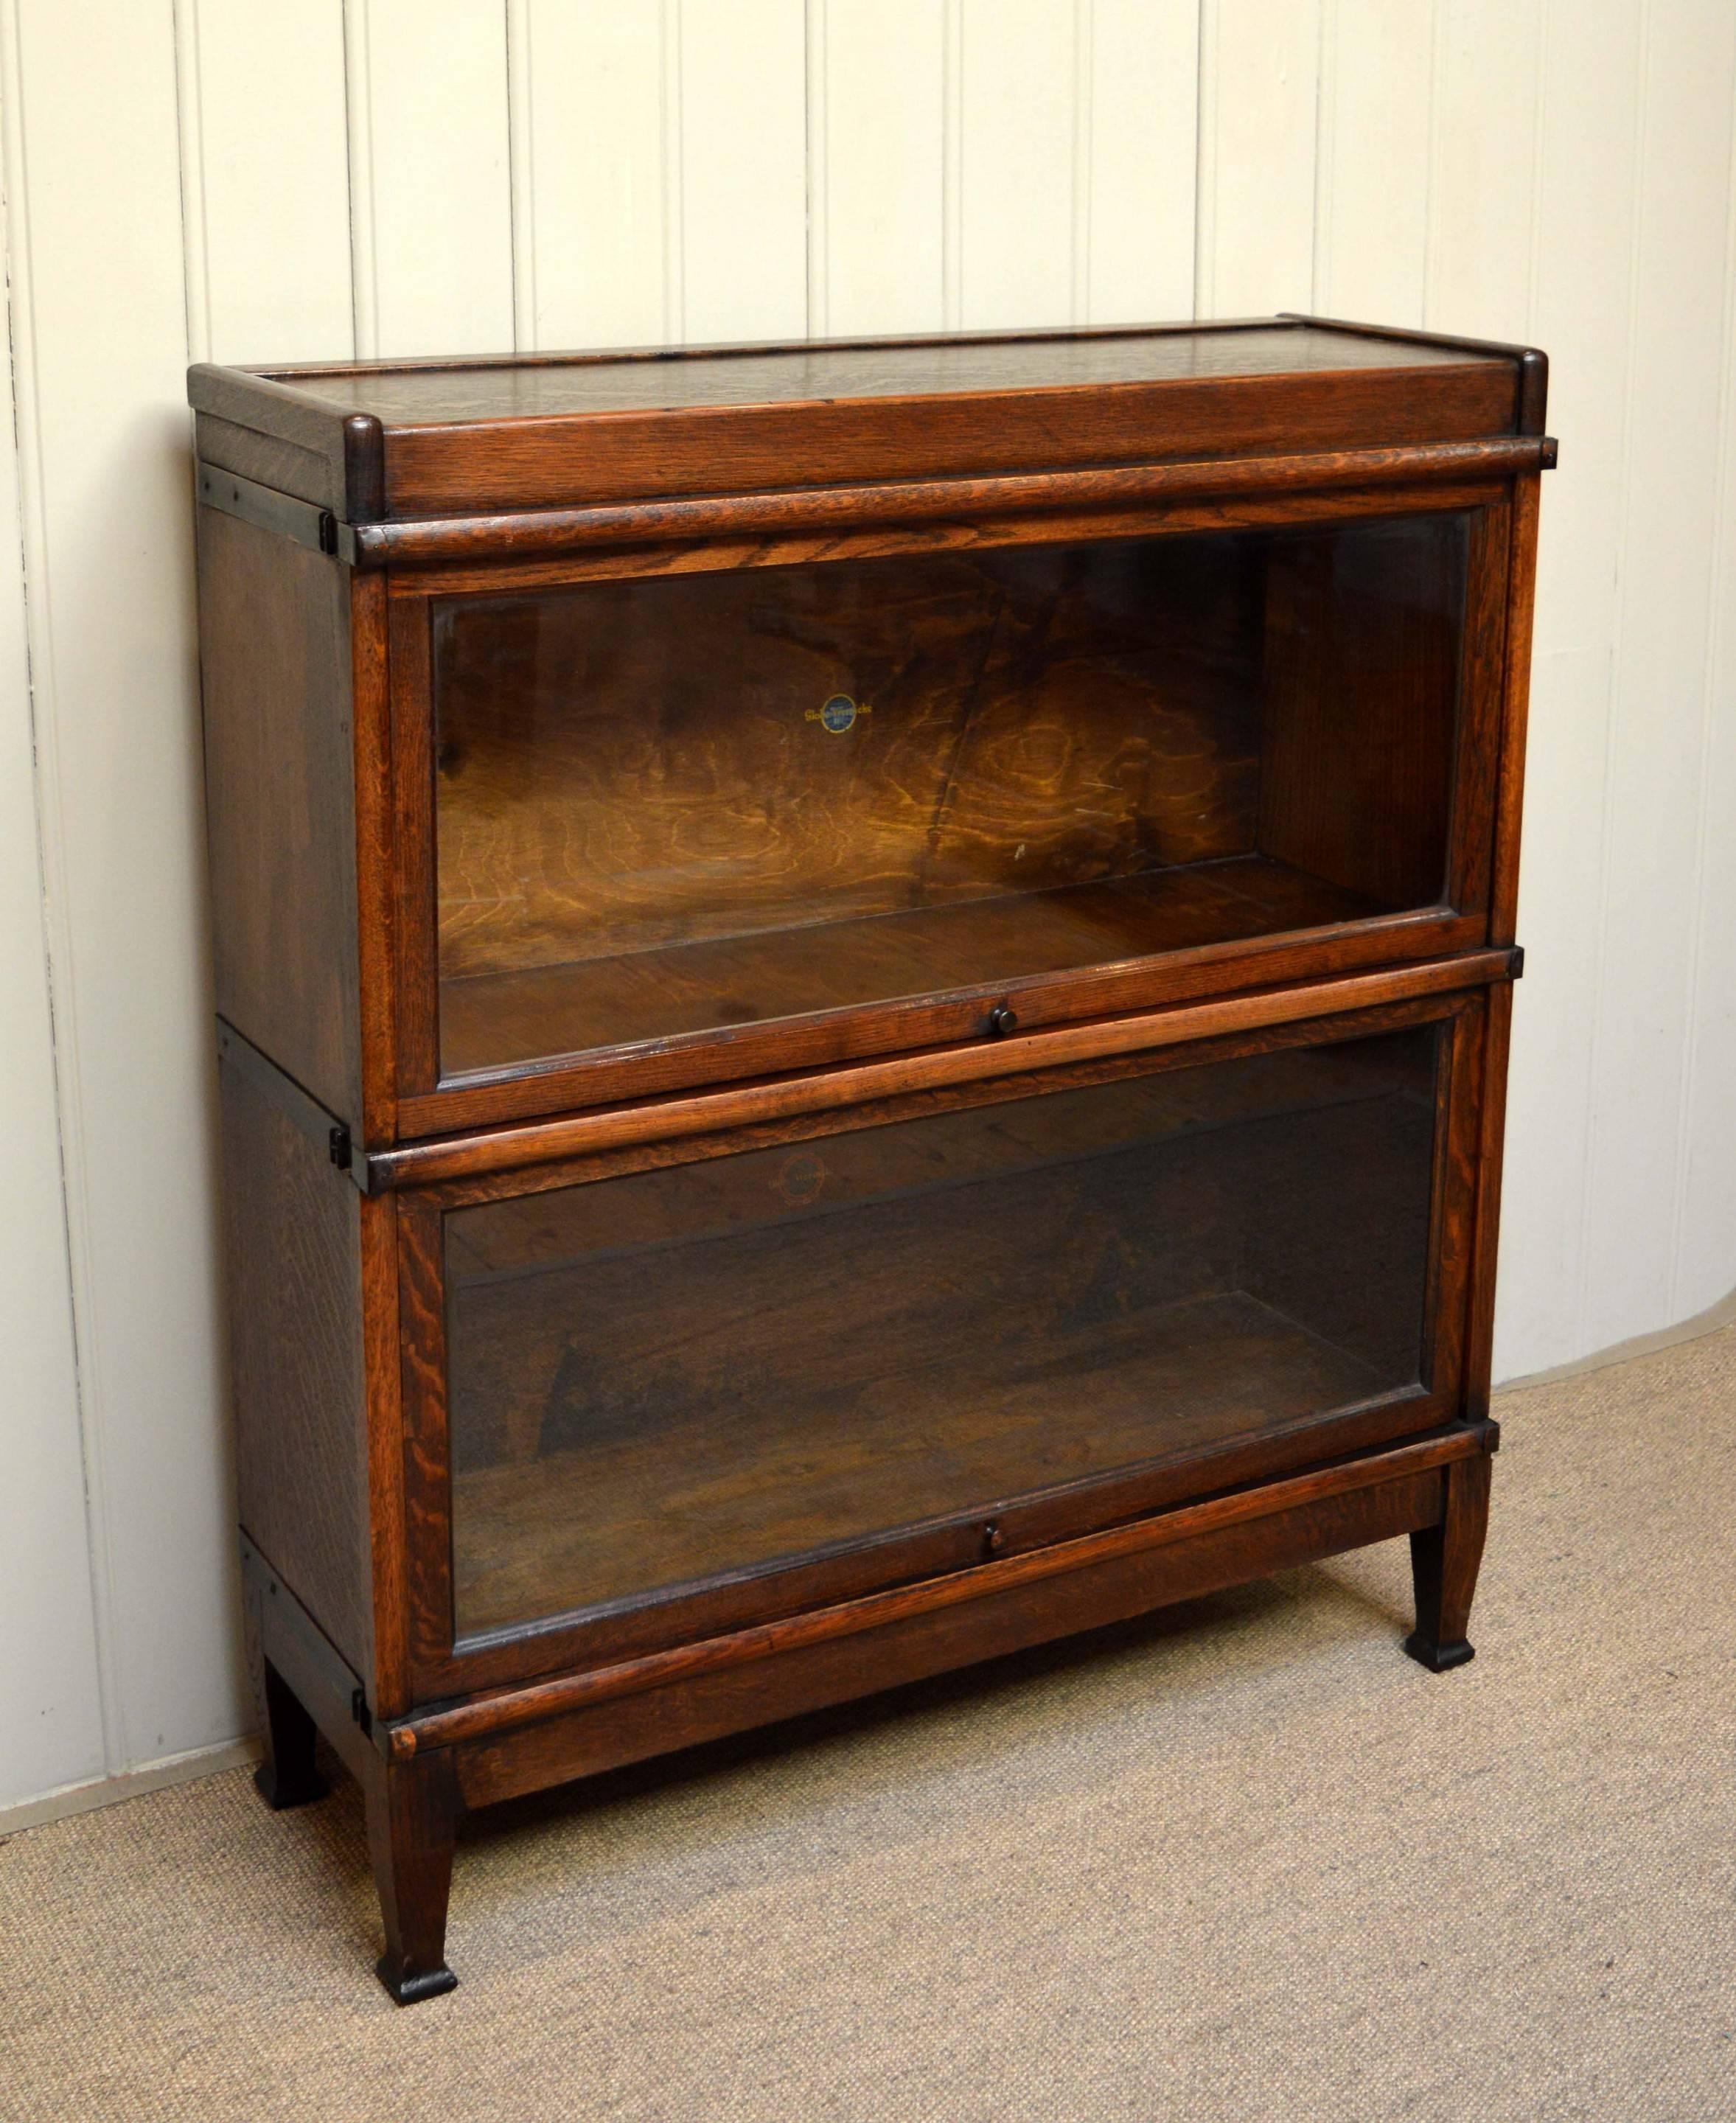 Two-tier oak Globe Wernicke bookcase having up and over glazed doors raised on straight tapering legs with spade feet.